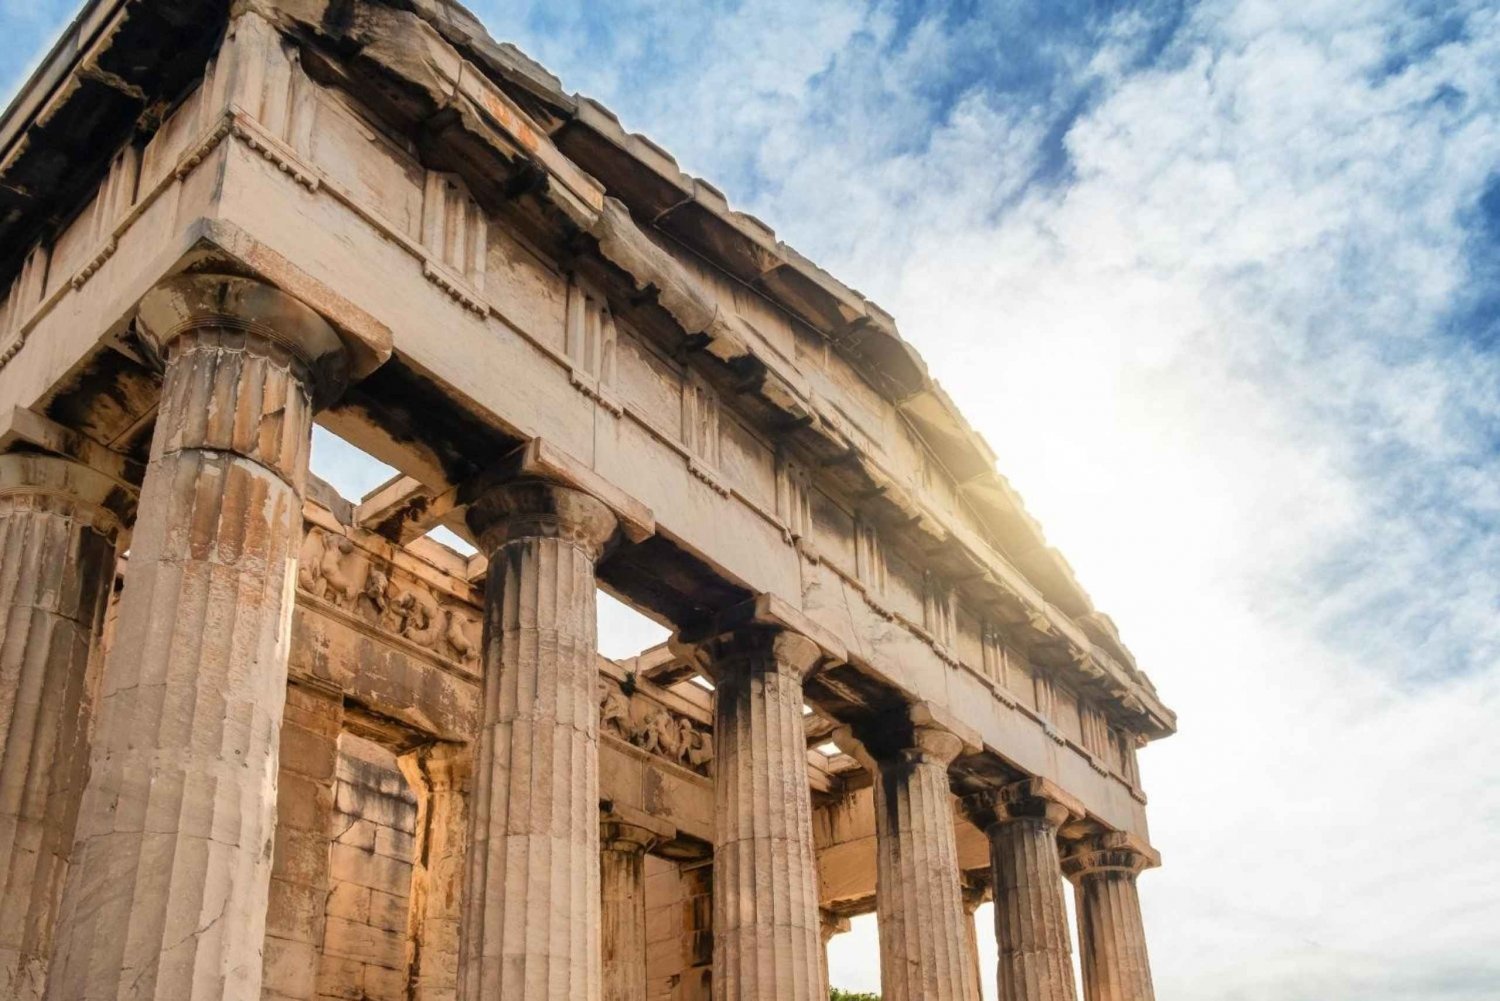 Athens: Capture the most Photogenic Spots with a Local